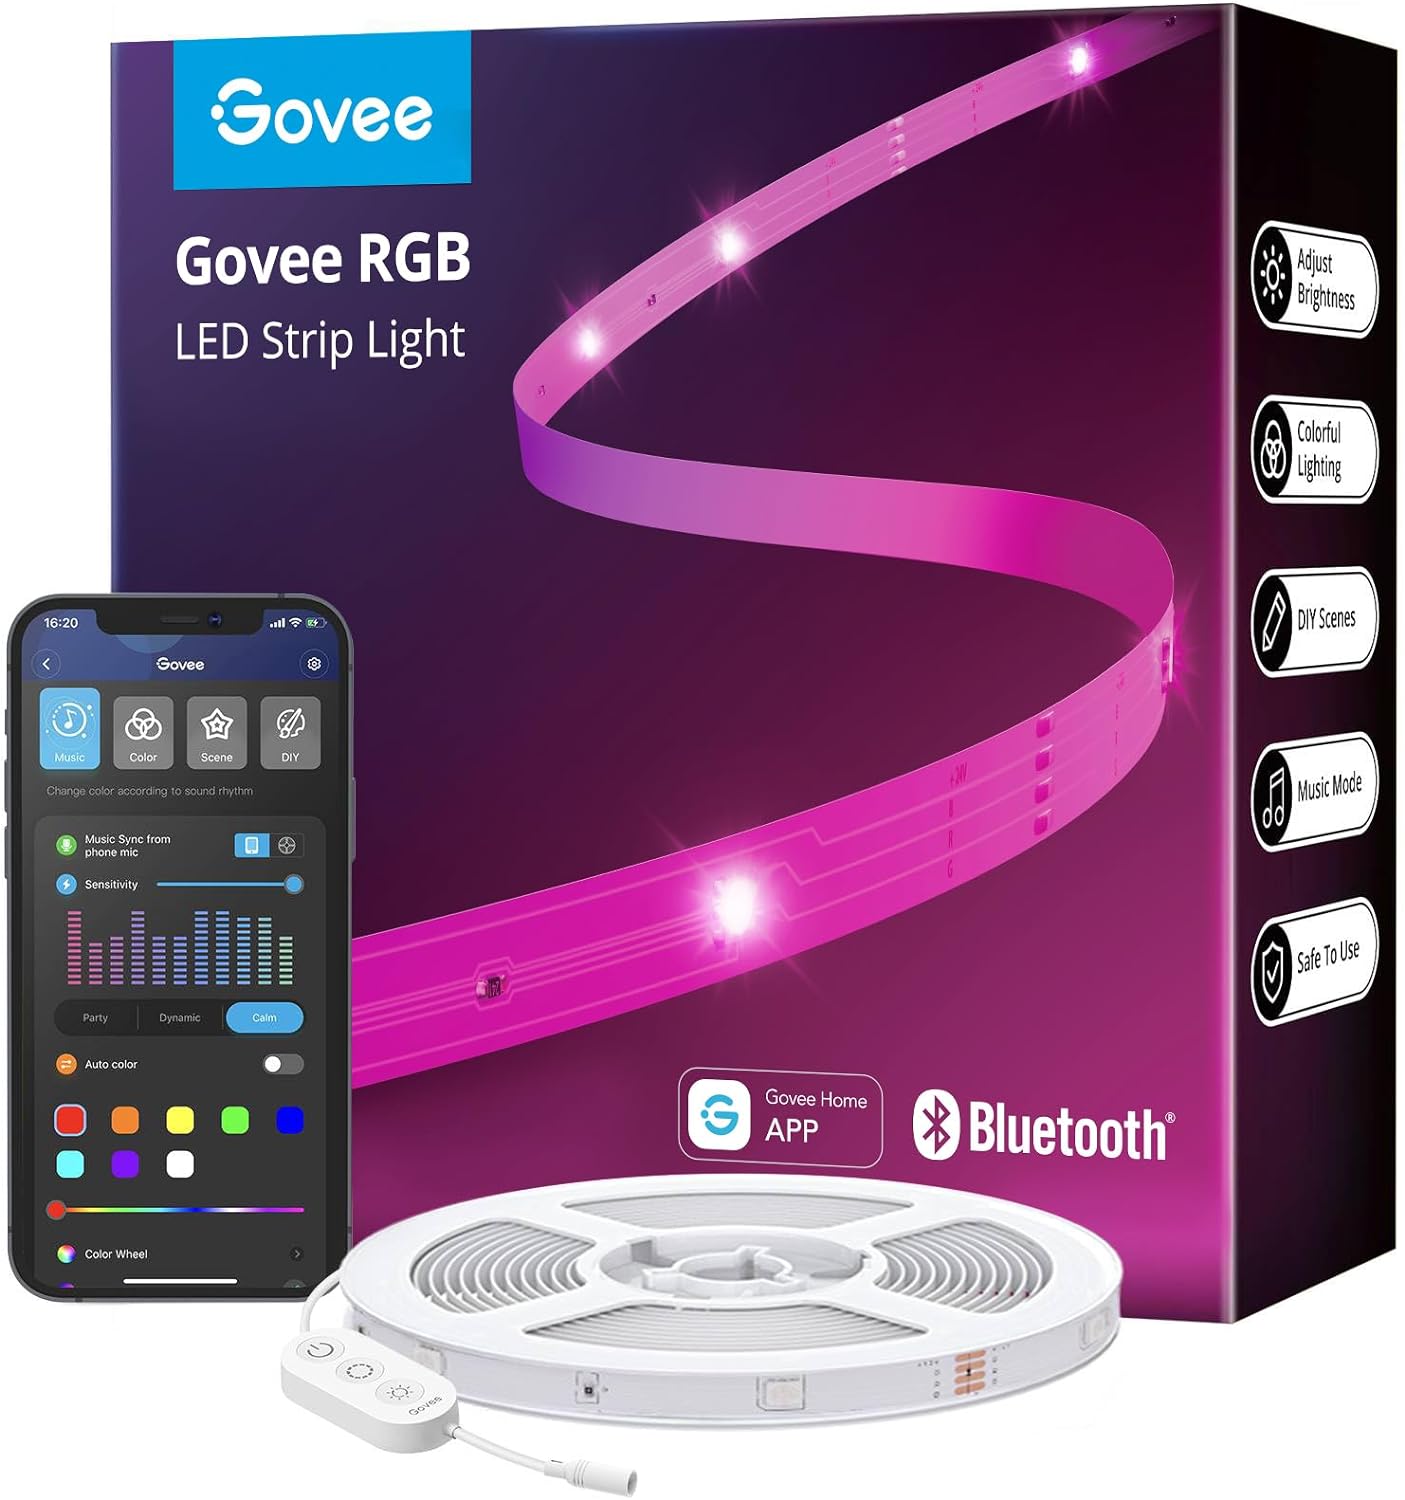 Govee 100ft LED Strip Lights, Bluetooth RGB LED Lights with App Control, 64 Scenes and Music Sync LED Strip Lighting for Bedroom, Living Room, Kitchen, Party, ETL Listed Adapter